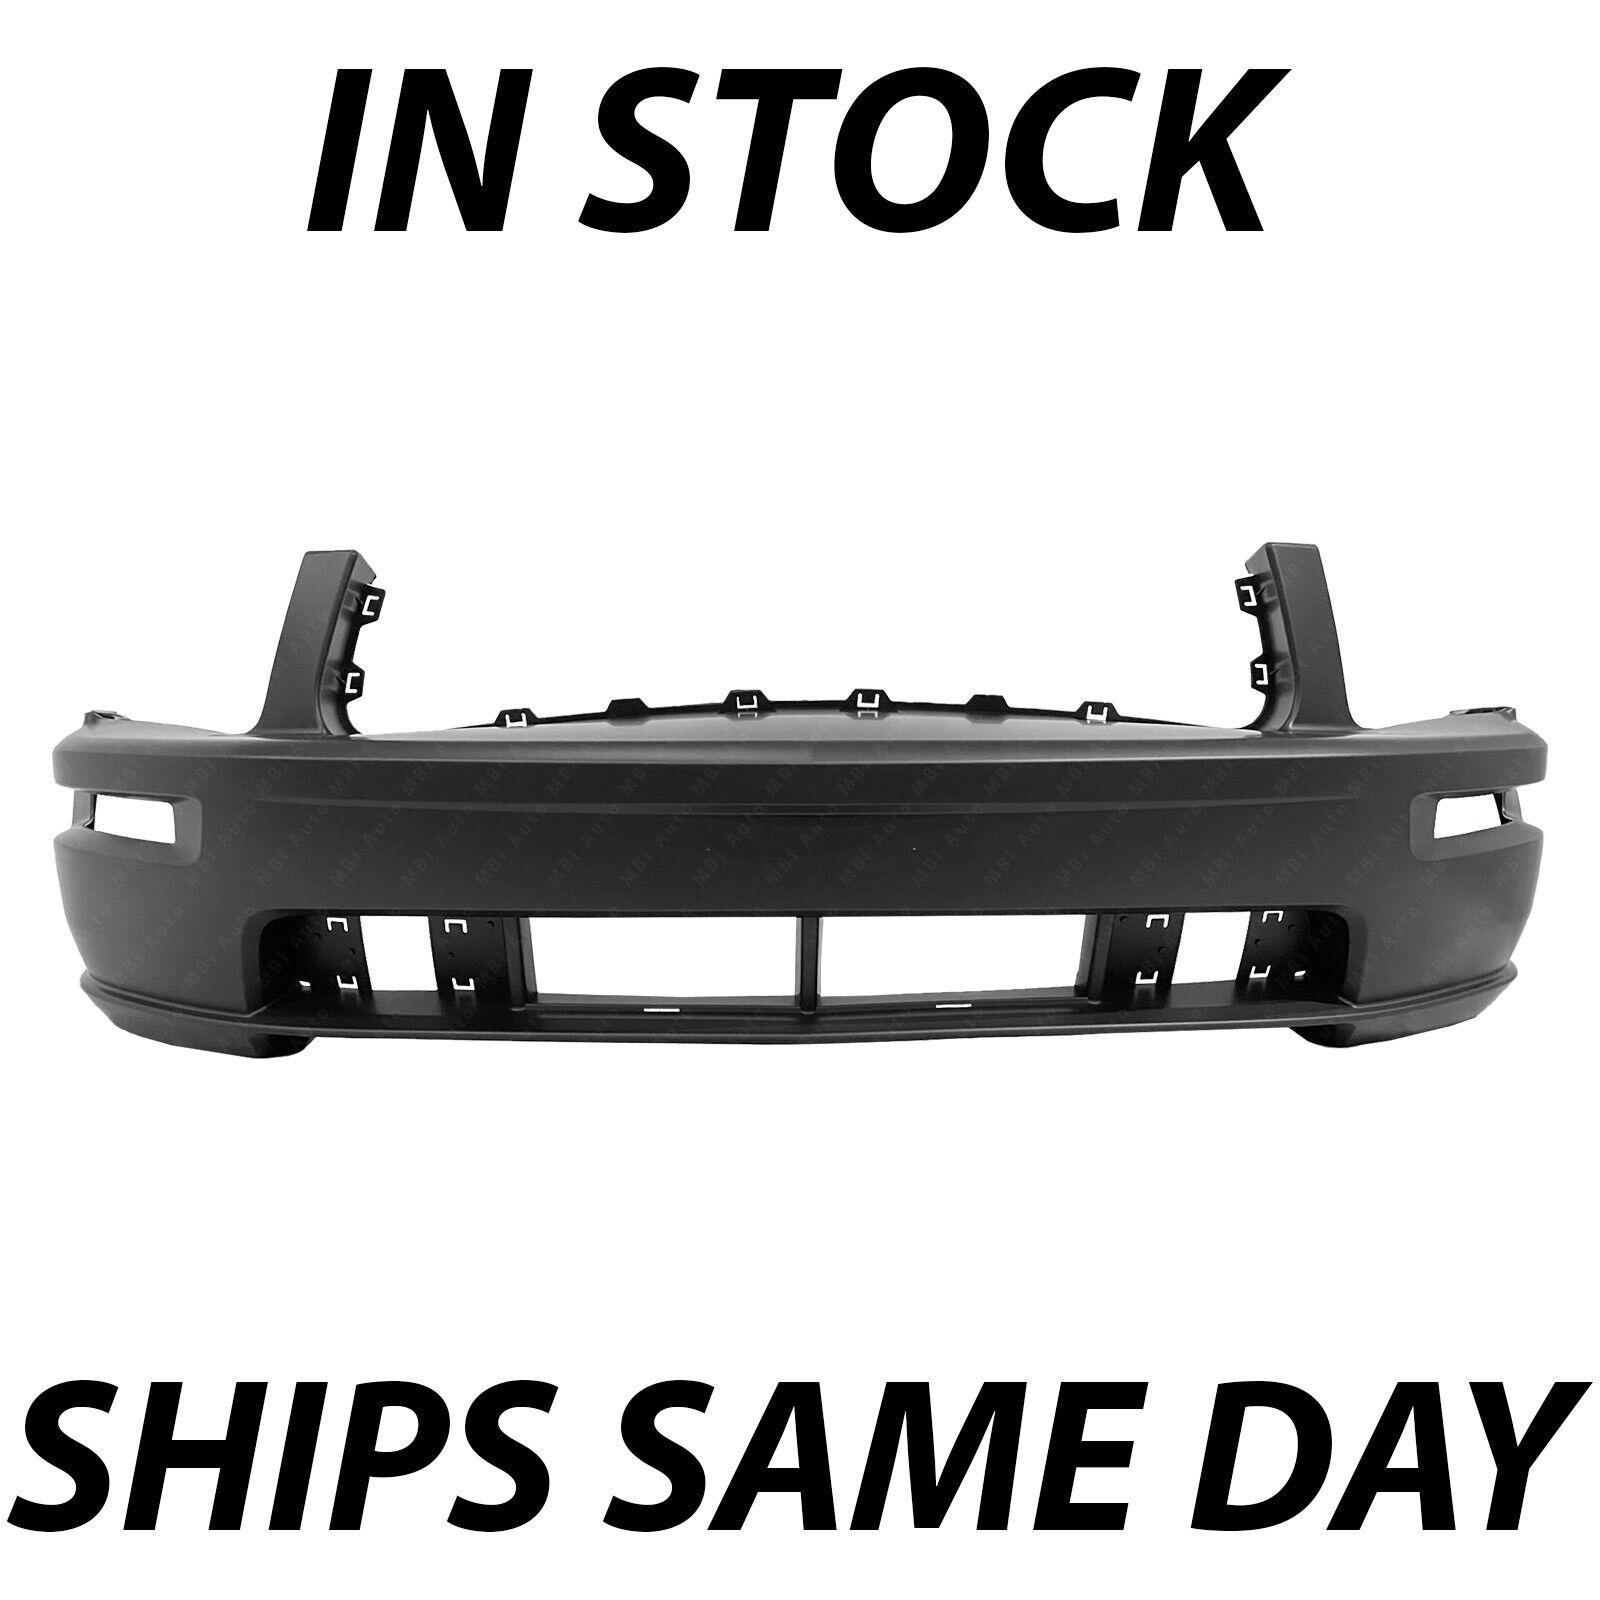 NEW Primered - Front Bumper Cover for 2005 2006 2007 2008 2009 Ford Mustang GT